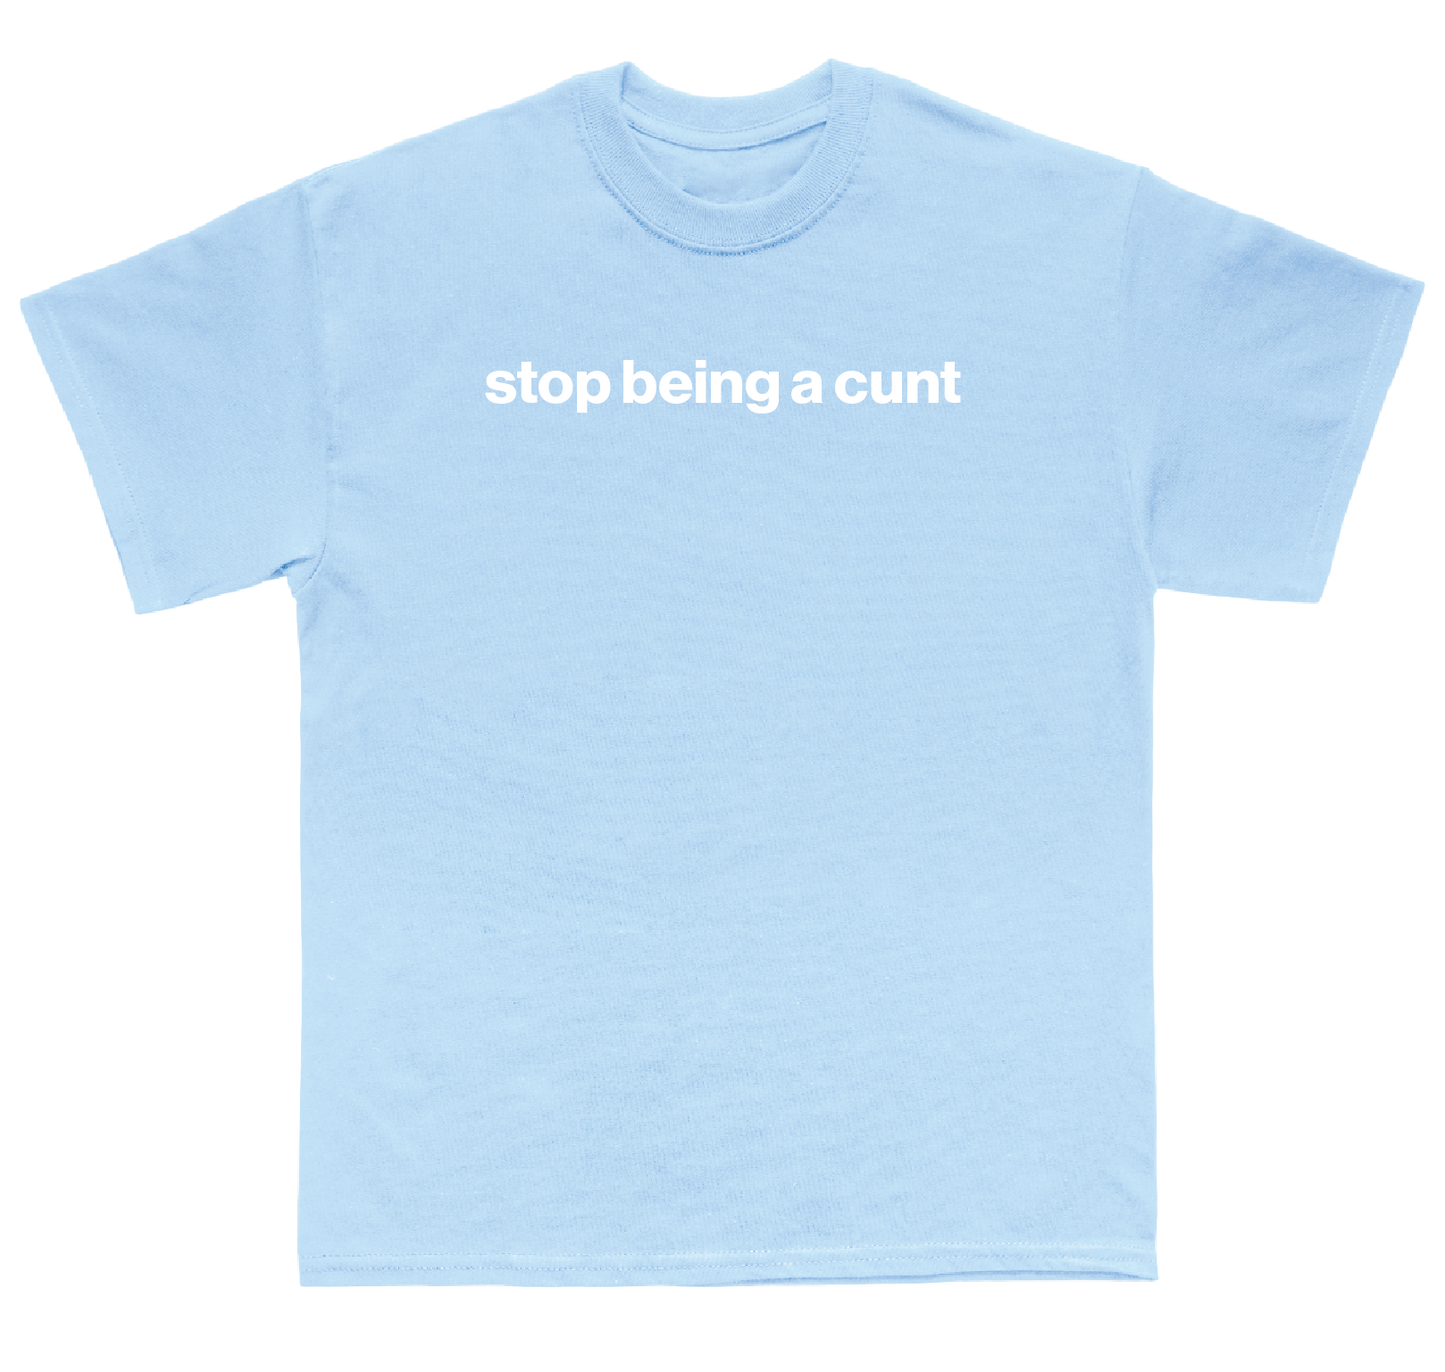 stop being a cunt shirt